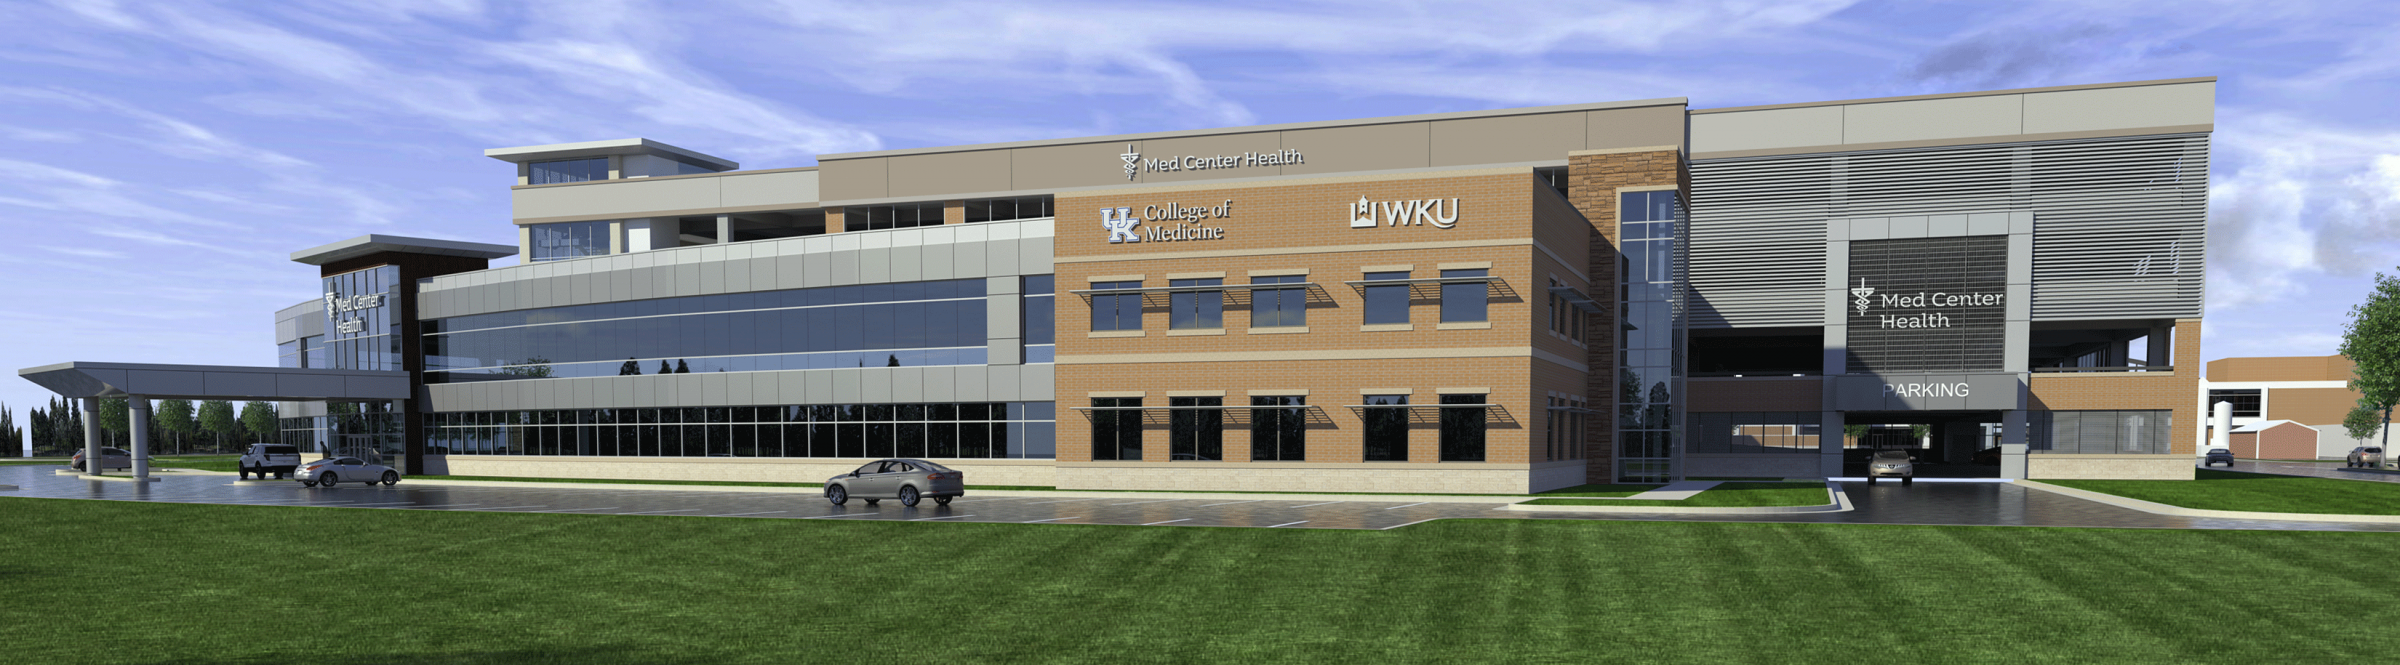 rendering of the Bowling Green College of Medicine campus